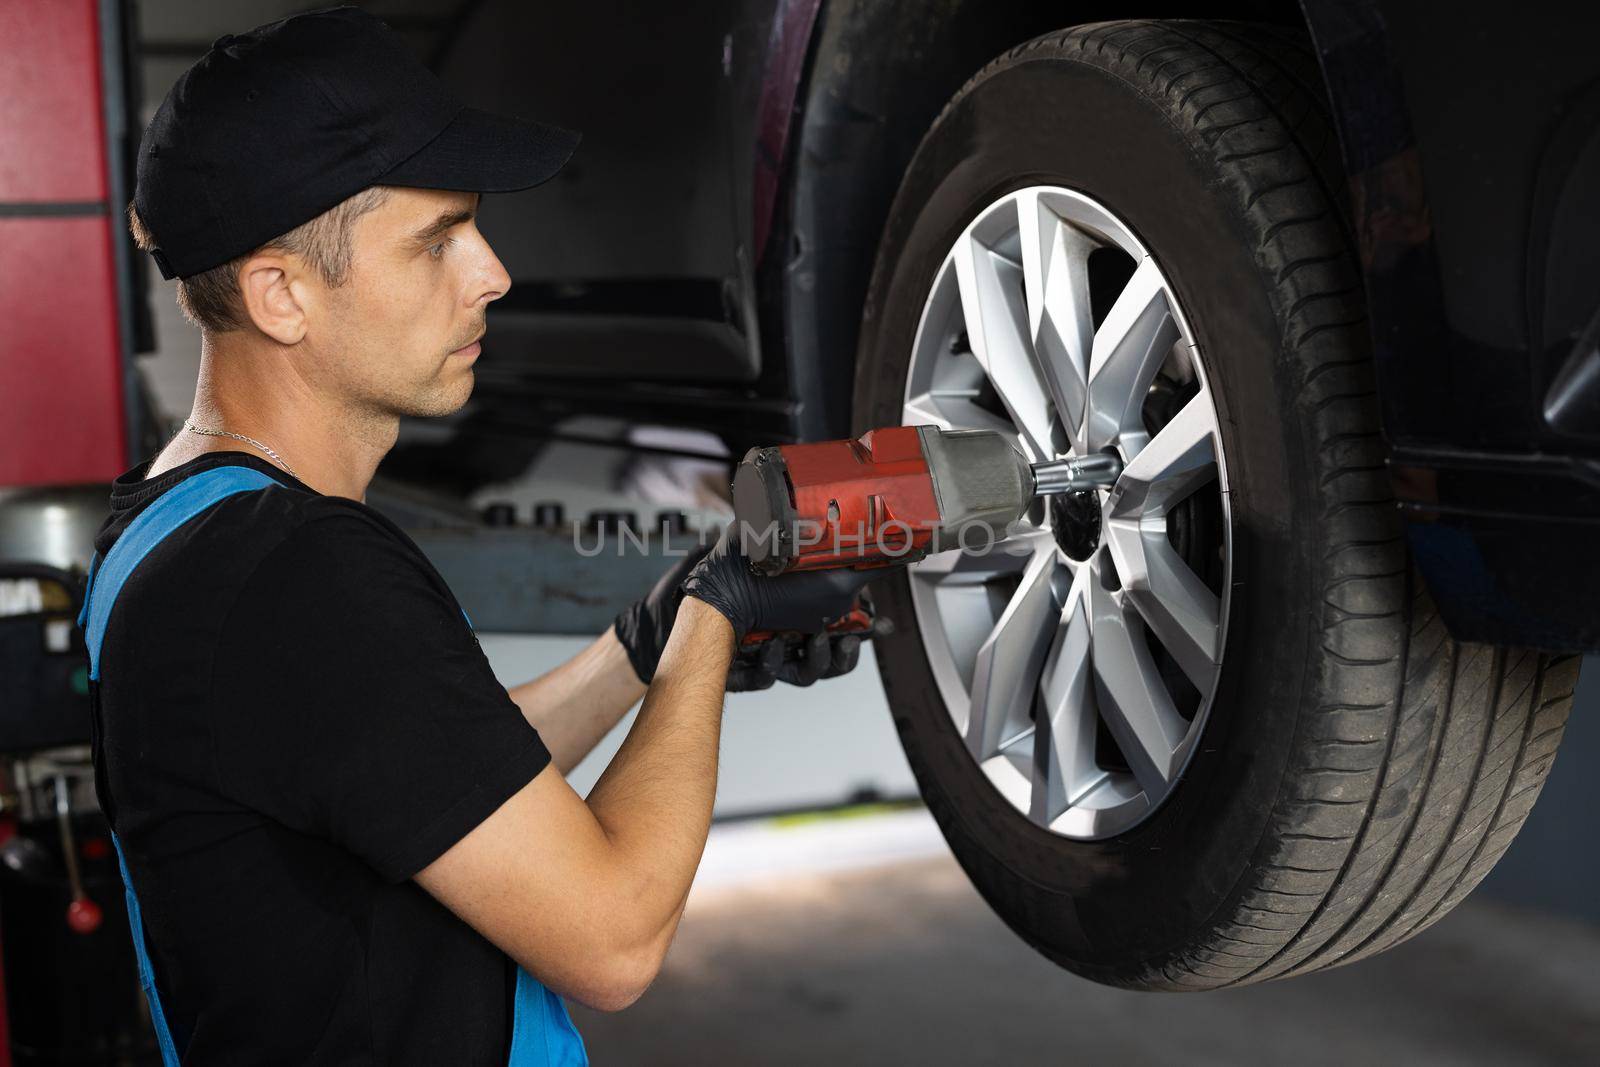 Repairman Works in a Modern Car Service. Specialists Removes the Wheel in Order to Fix a Component on a Vehicle. Mechanic is Unscrewing Lug Nuts with Pneumatic Impact Wrench by uflypro